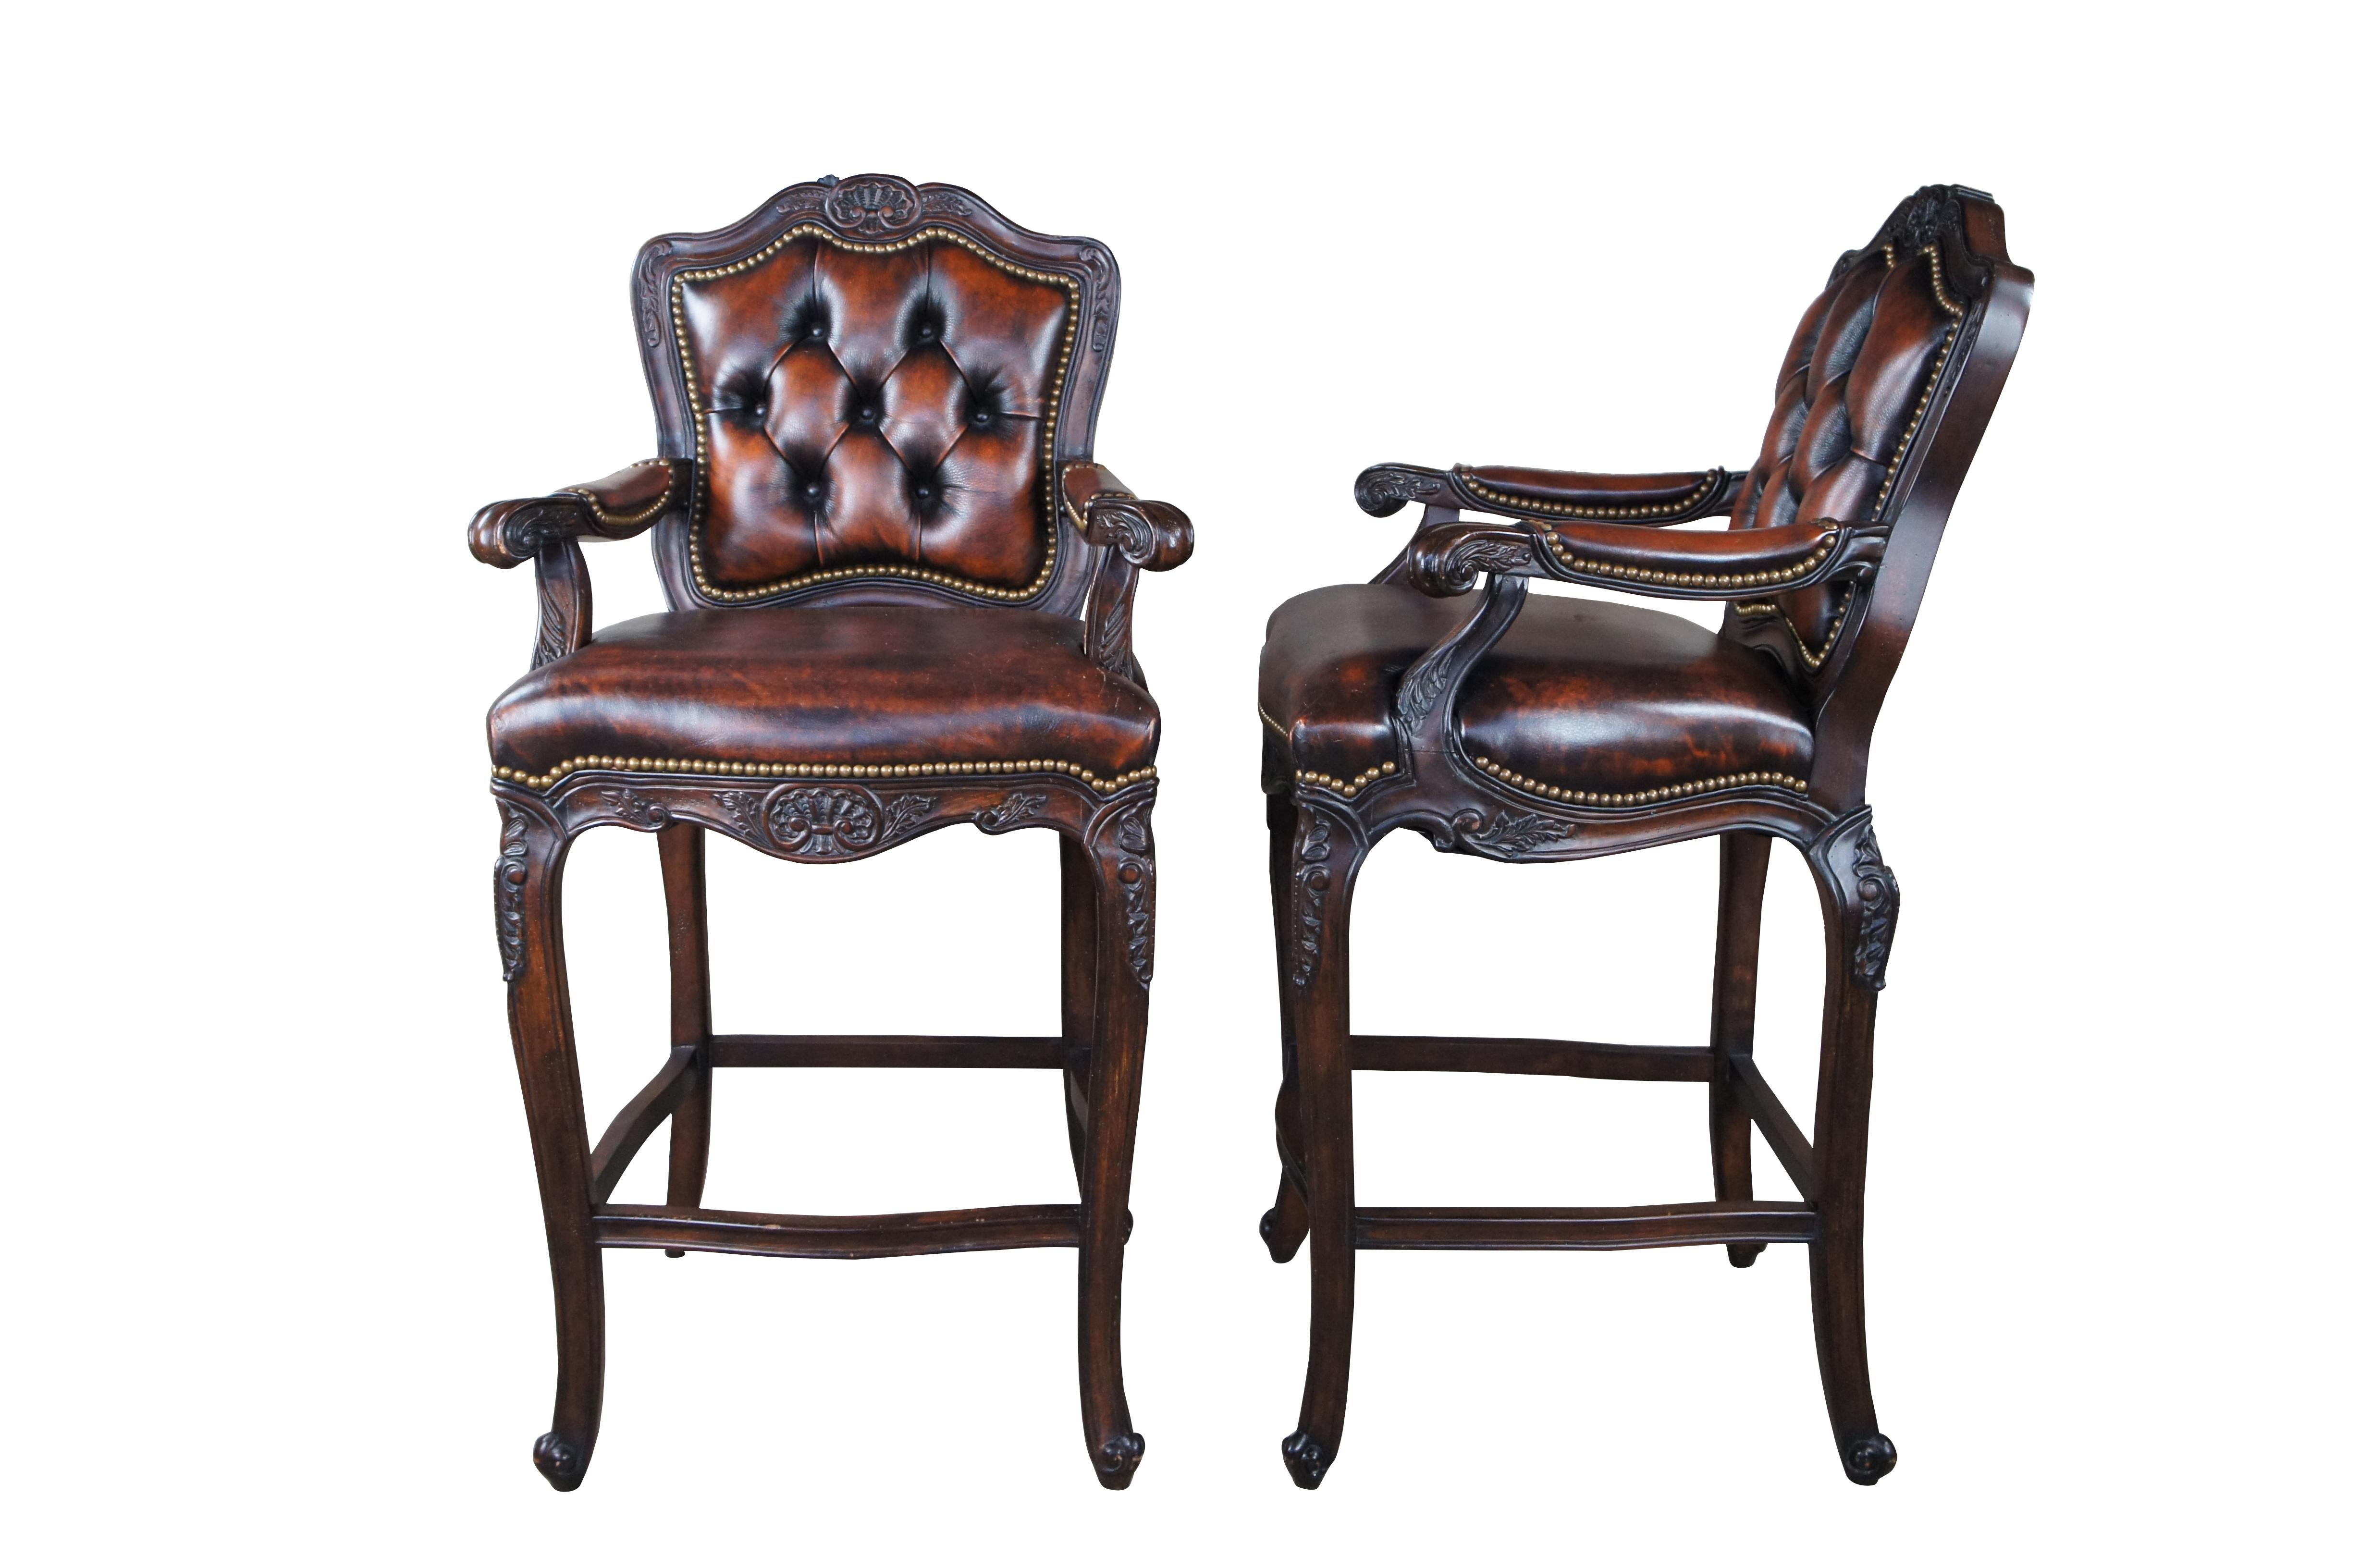 Pair of Hancock & Moore French Country / Louis XV style bar stools.  Features a carved and scalloped frame with brown leather seats and tufted back.  Accented by brass nail head trim over long cabriole legs with scrolled feet. MSRP